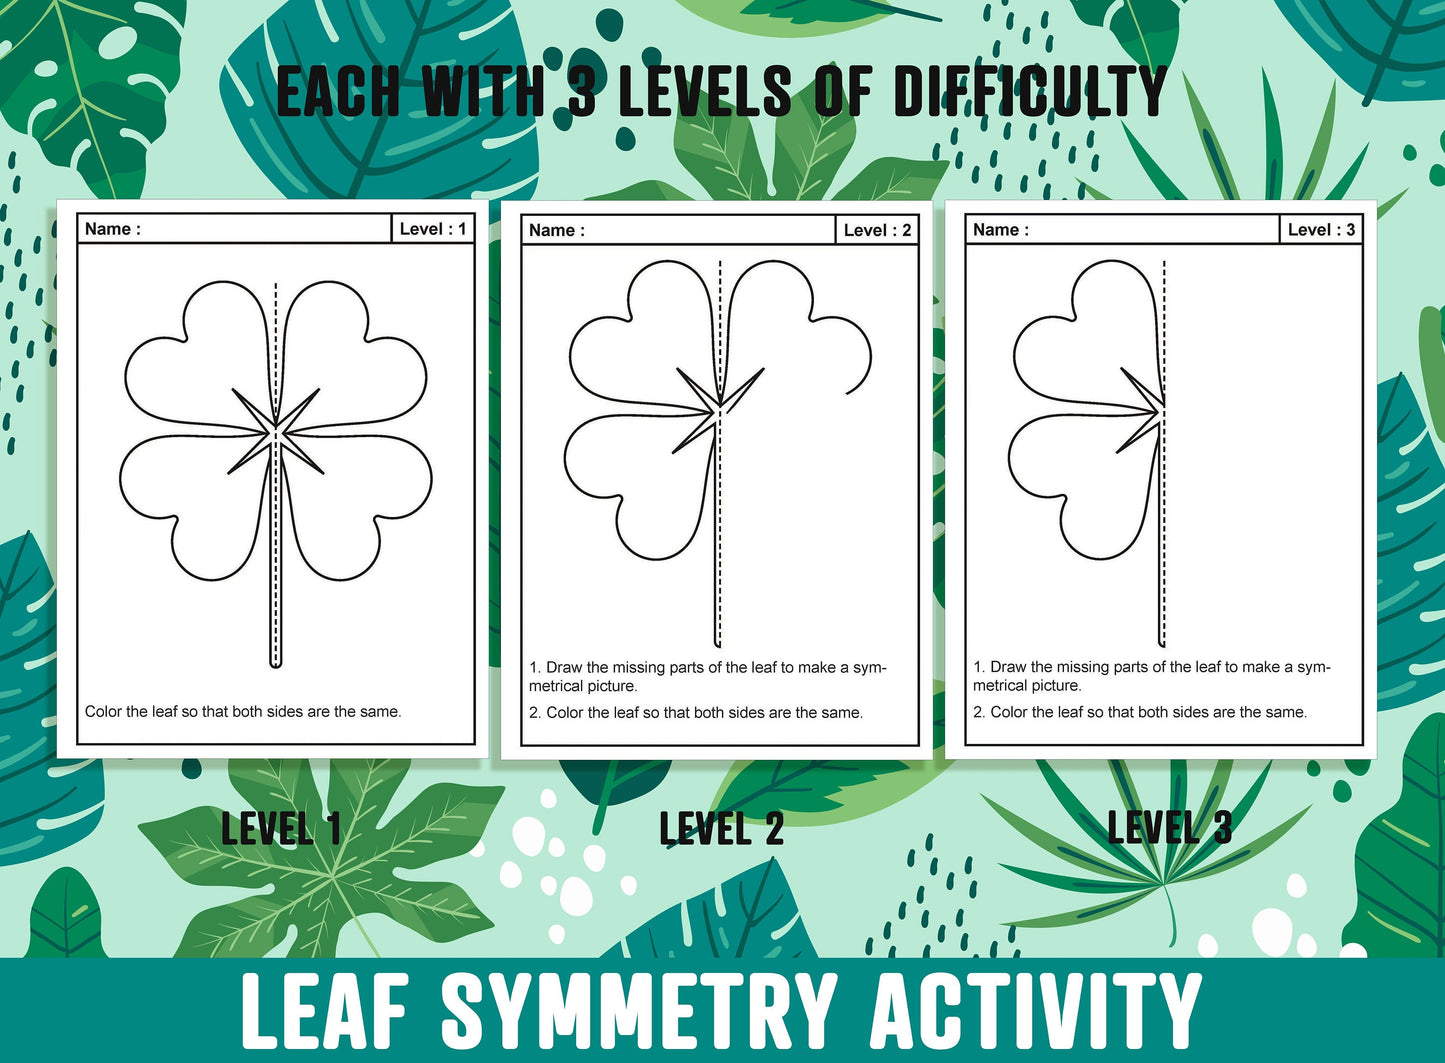 Leaf Symmetry Worksheet, Leaves Theme Lines of Symmetry Activity, 24 Pages, Includes 8 Designs, Each With 3 Levels of Difficulty, Art & Math